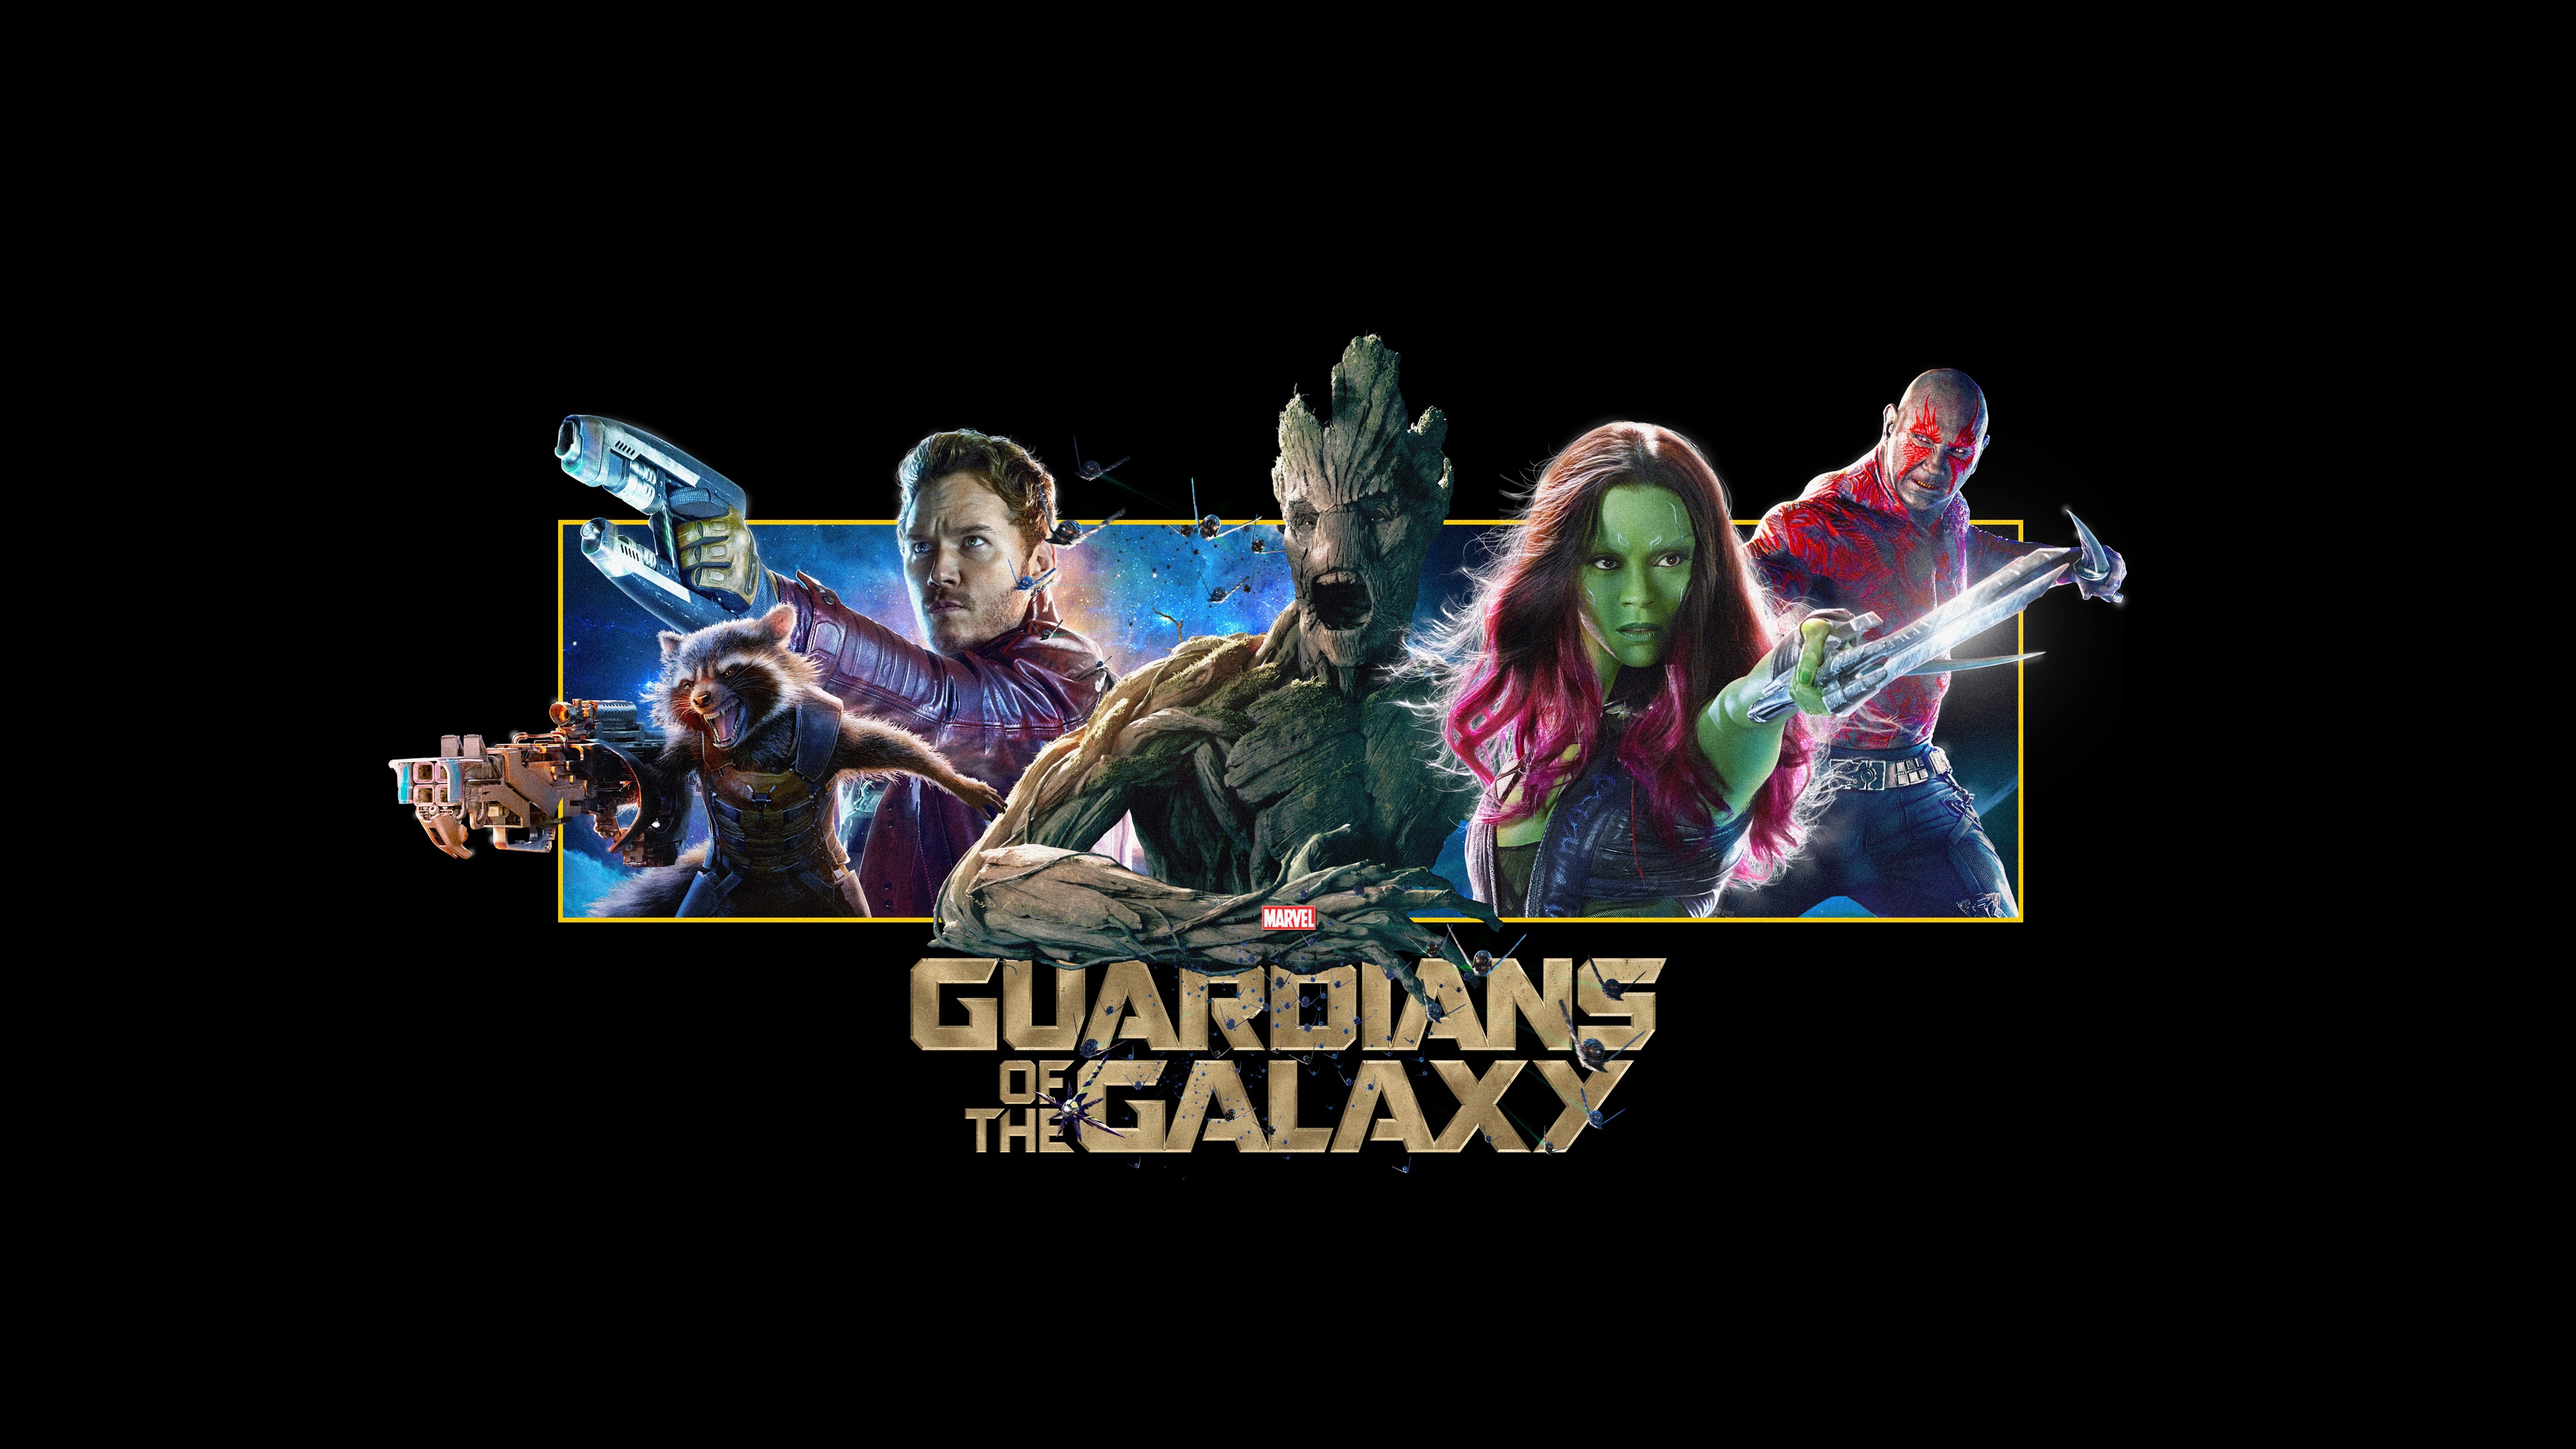 guardians of the galaxy banner 3840 x 2160 26